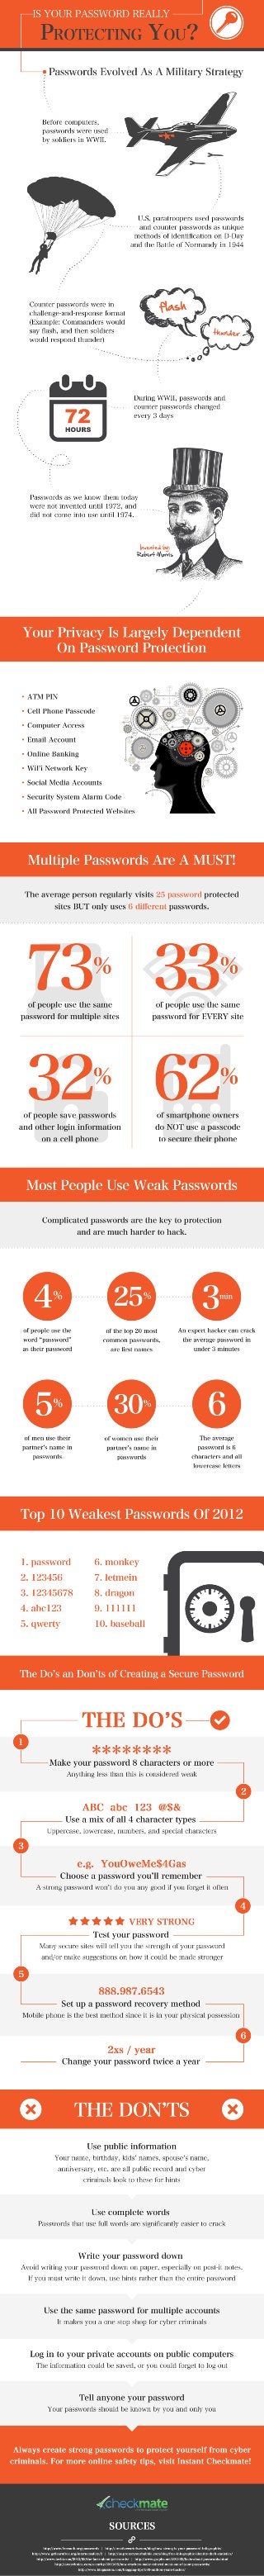 Online password protection for better security on web